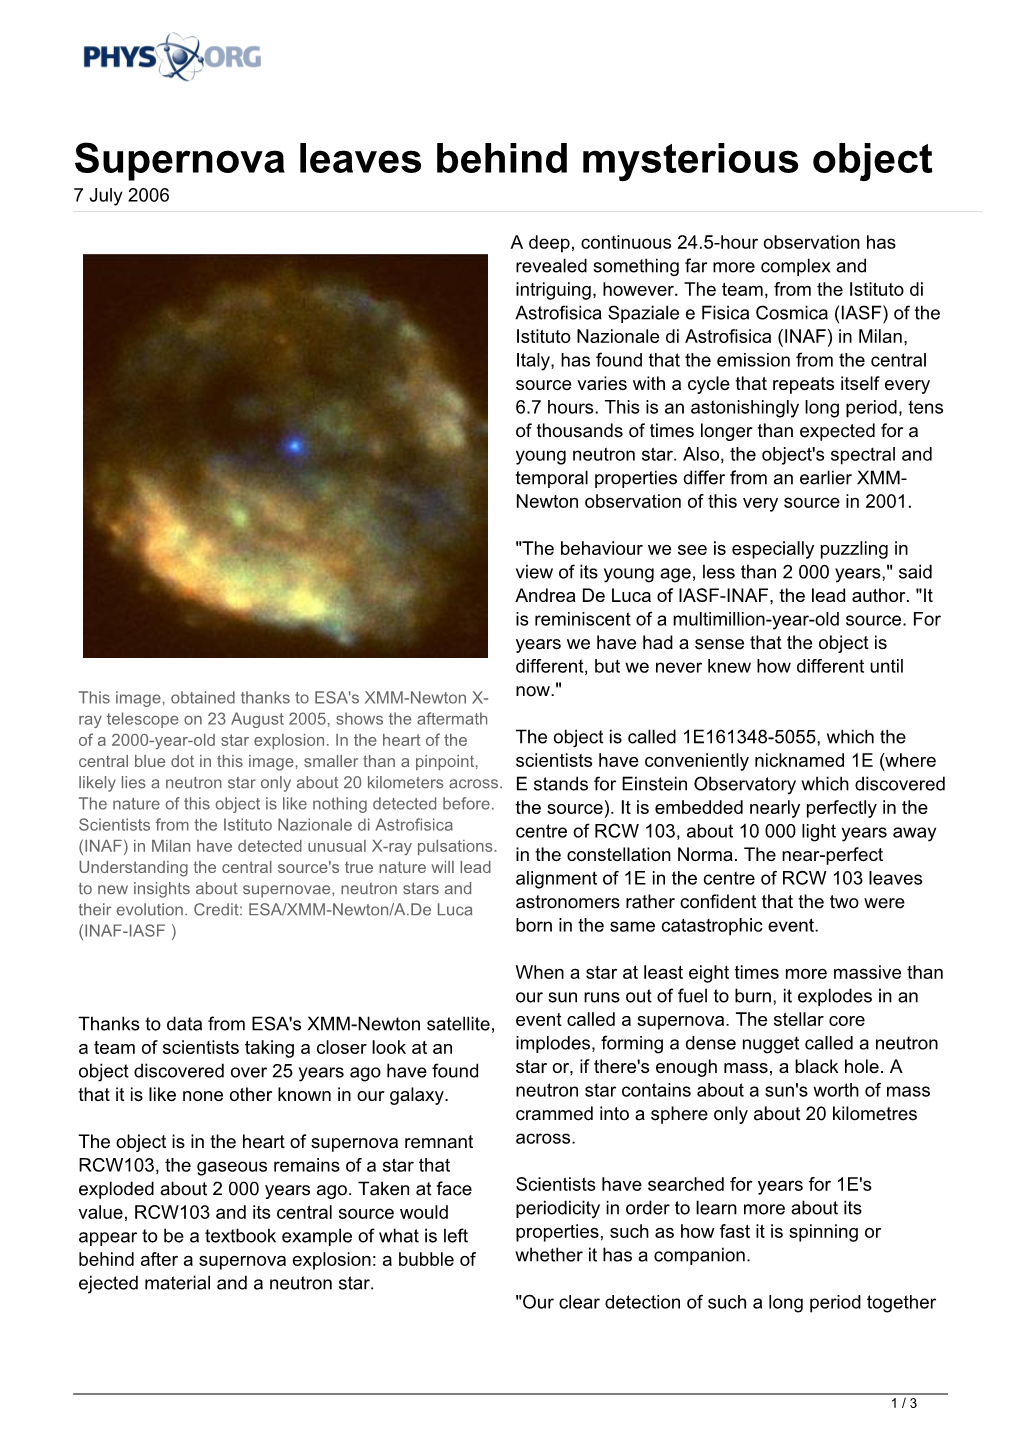 Supernova Leaves Behind Mysterious Object 7 July 2006